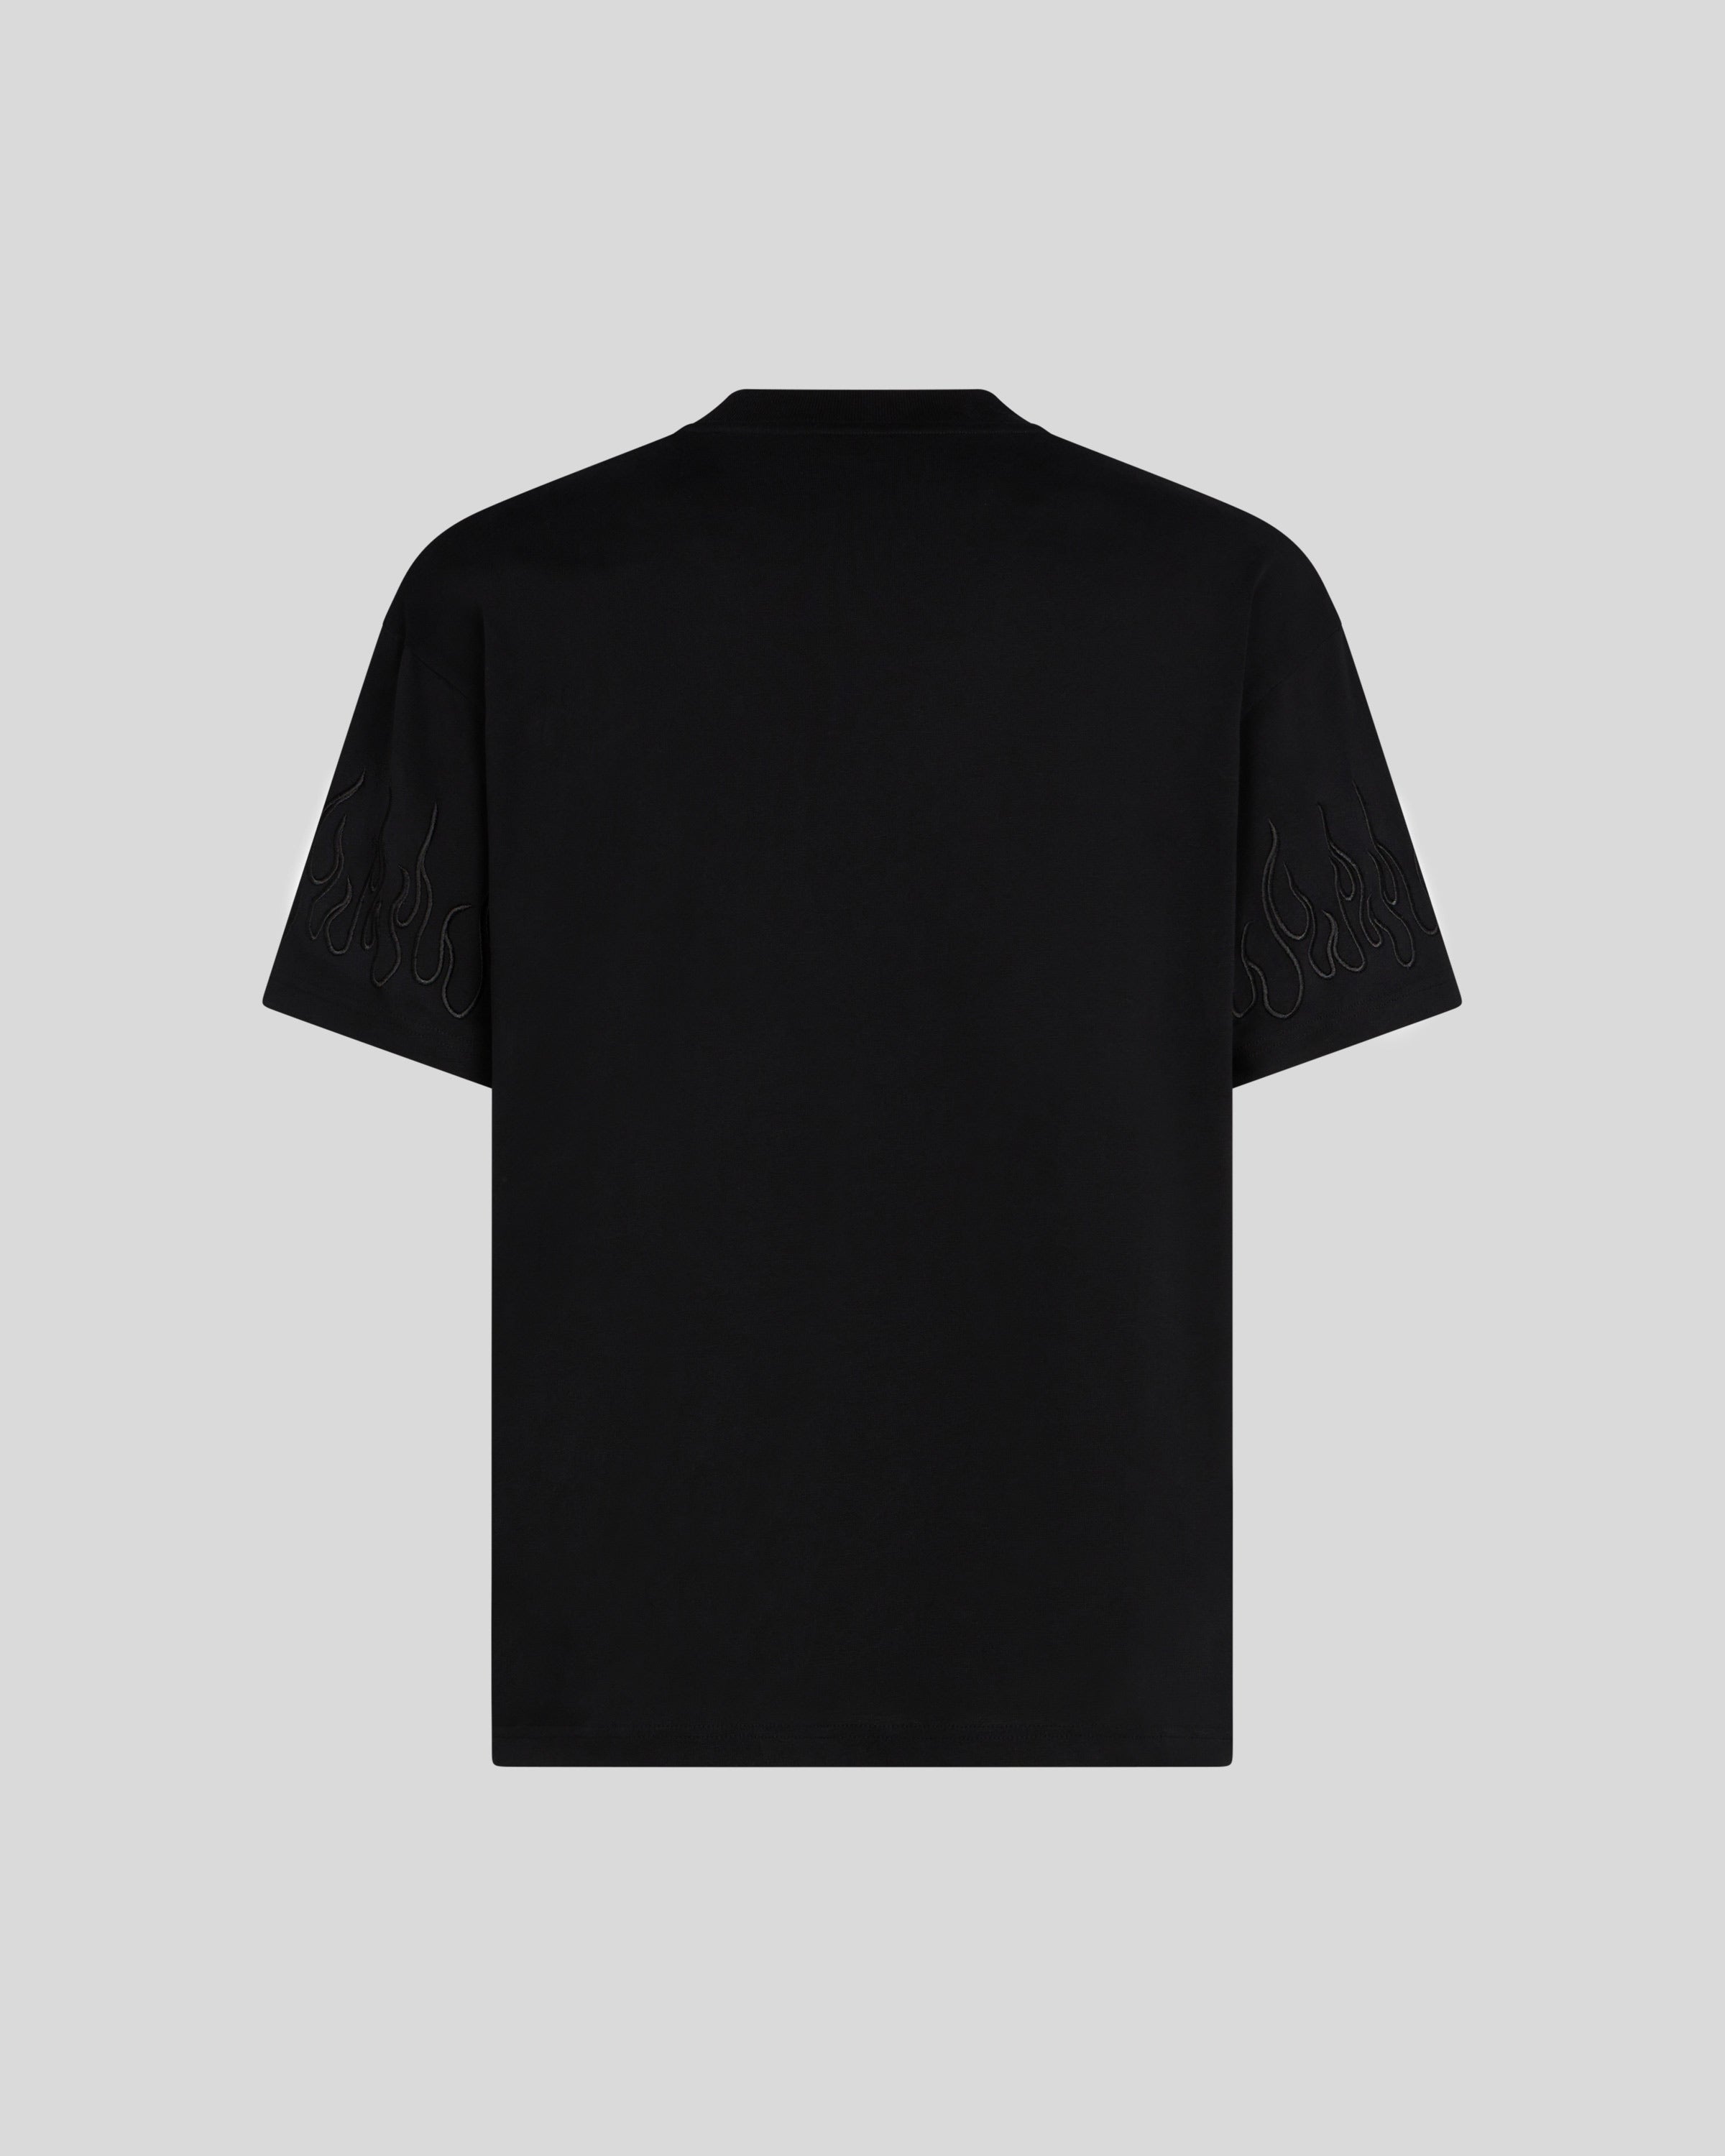 BLACK T-SHIRT WITH BLACK EMBROIDERED FLAMES